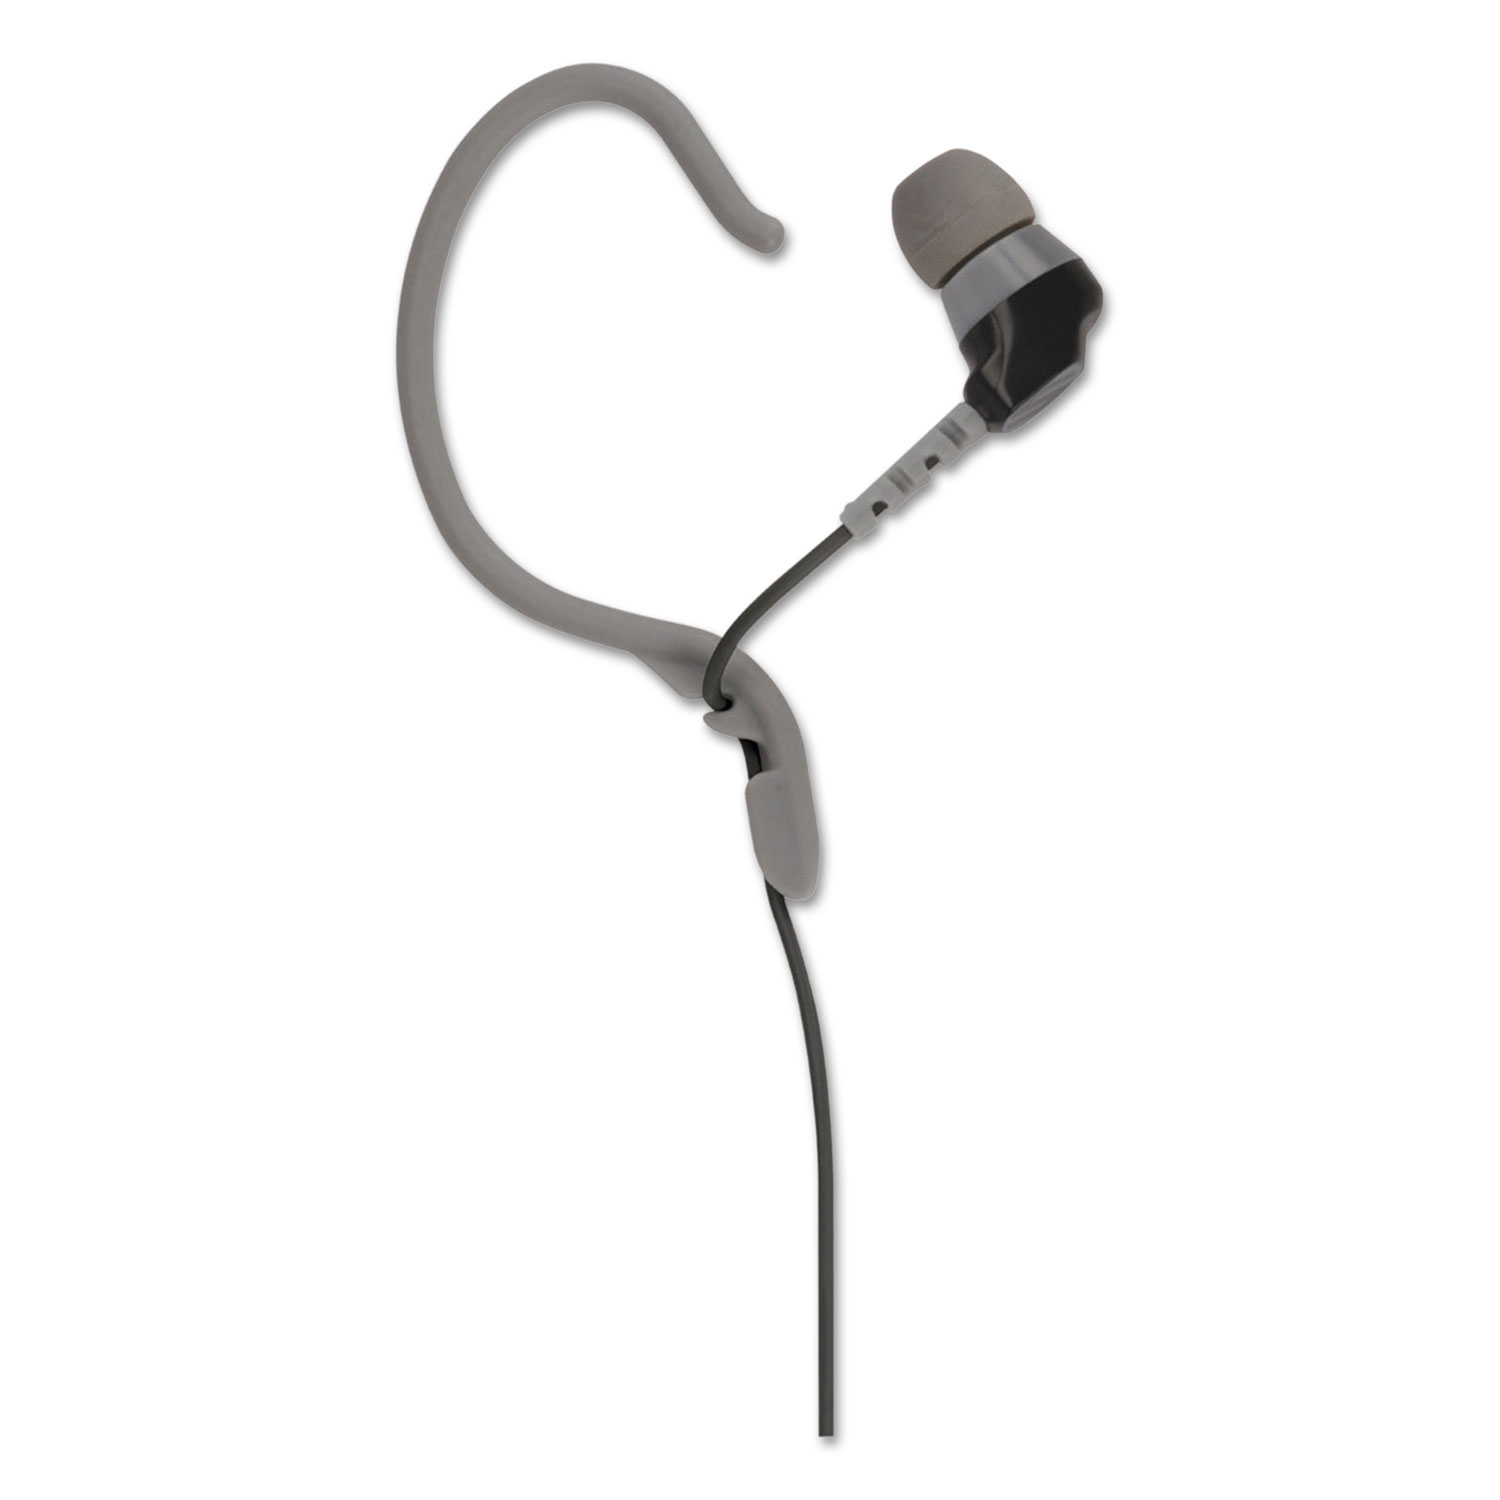 thudBUDS Noise Isolation Sport Earbuds, Black